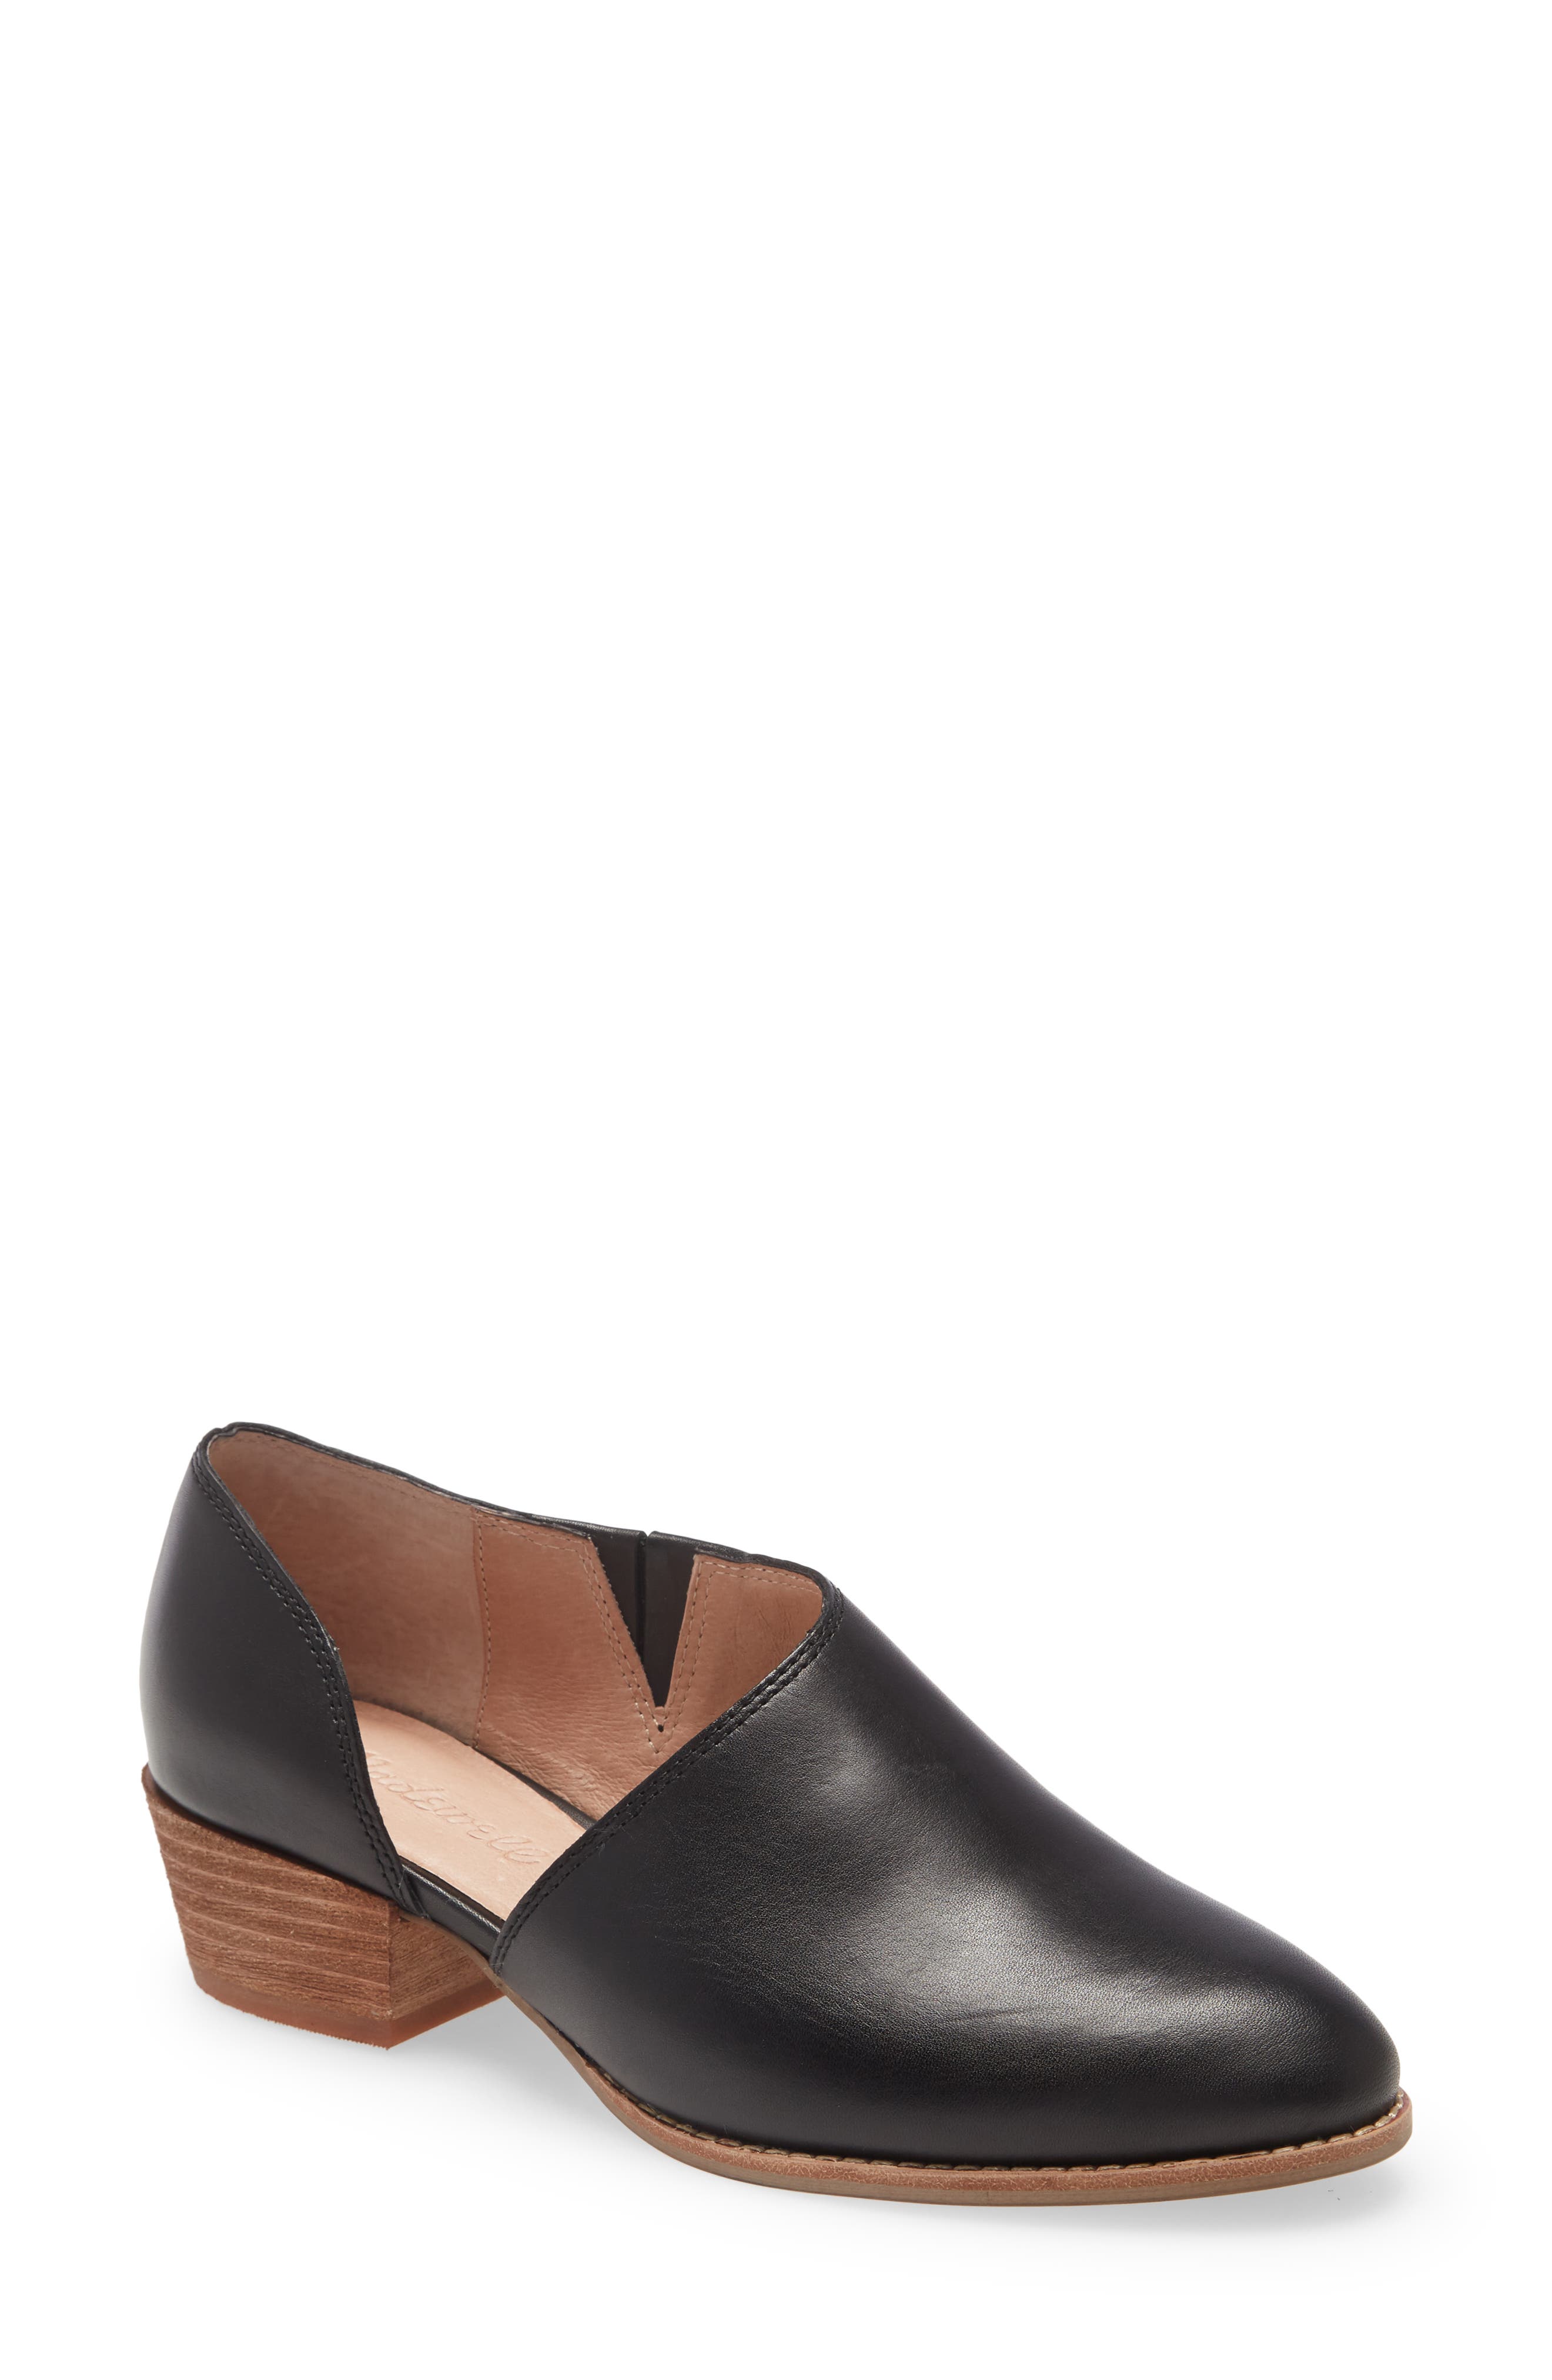 MADEWELL THE LUCIE BOOTIE,194340304628